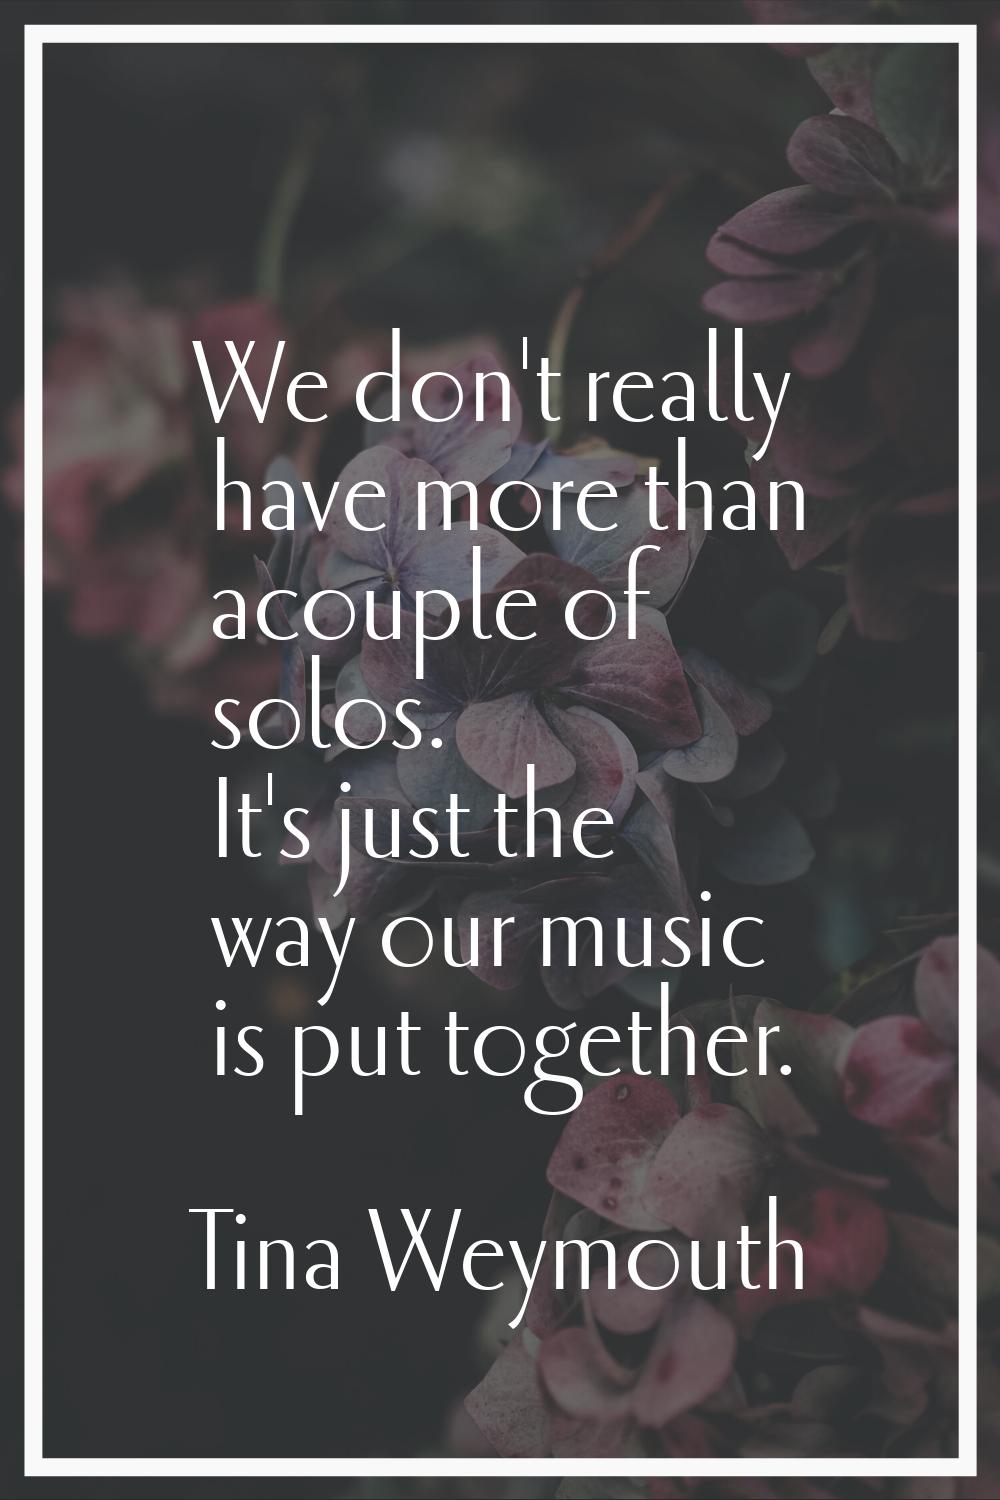 We don't really have more than acouple of solos. It's just the way our music is put together.